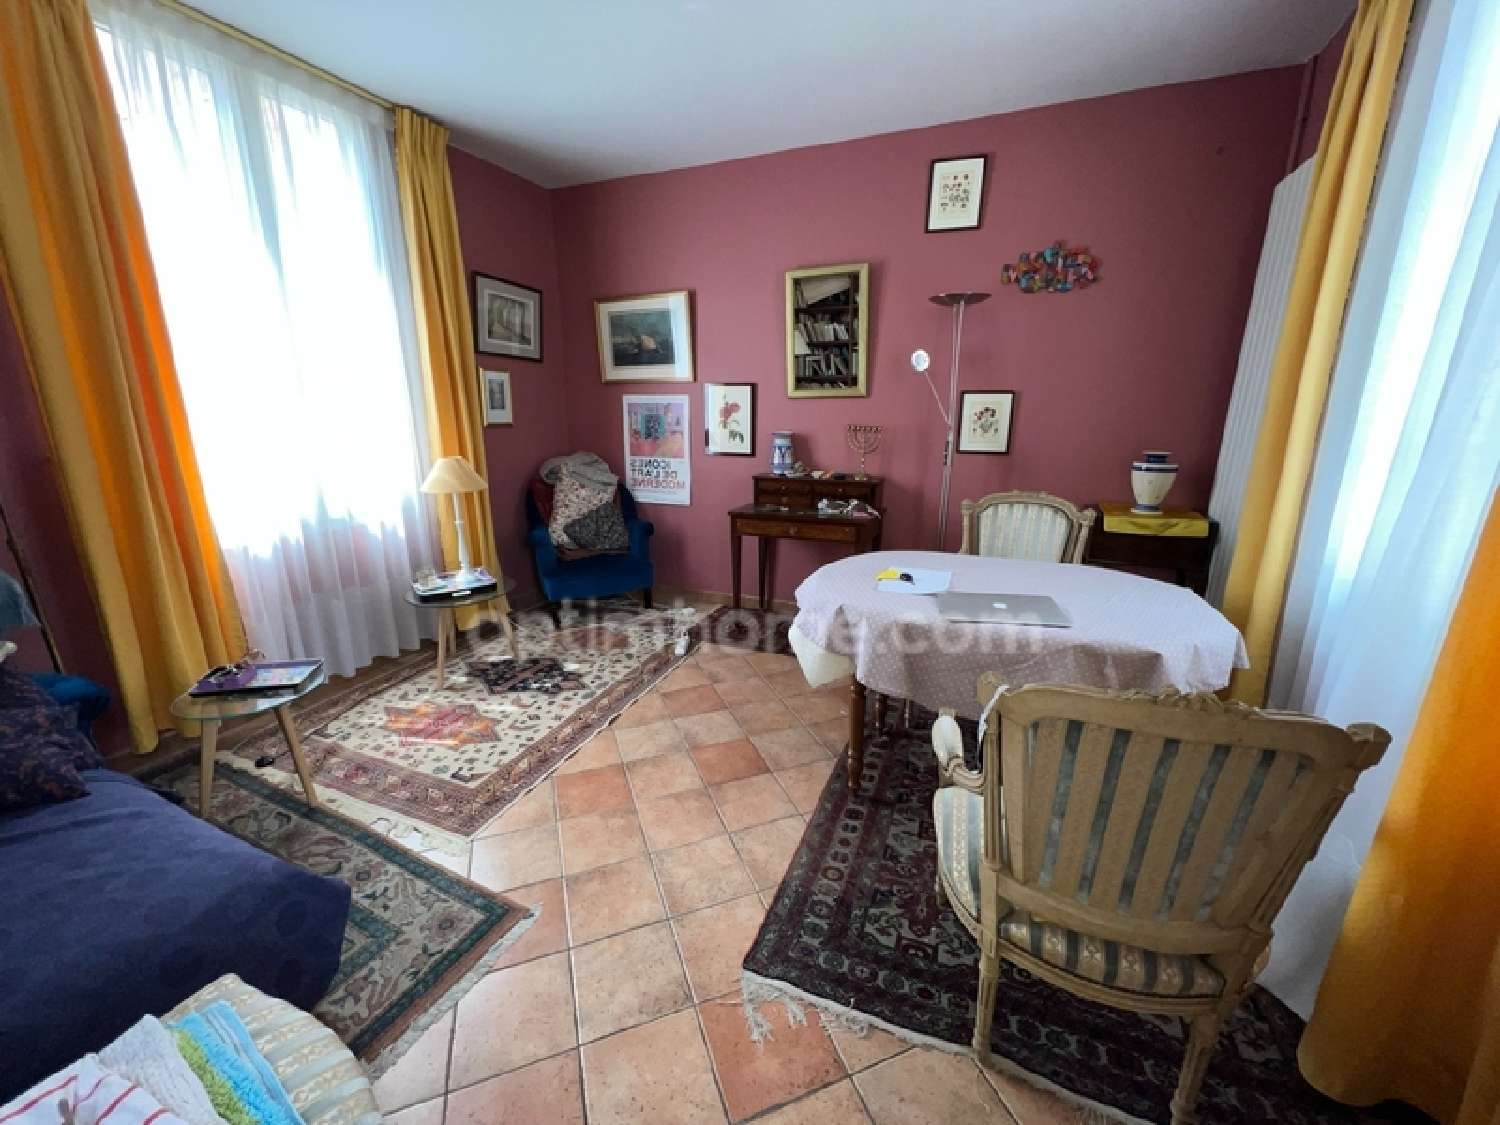  for sale city house Lisieux Calvados 3